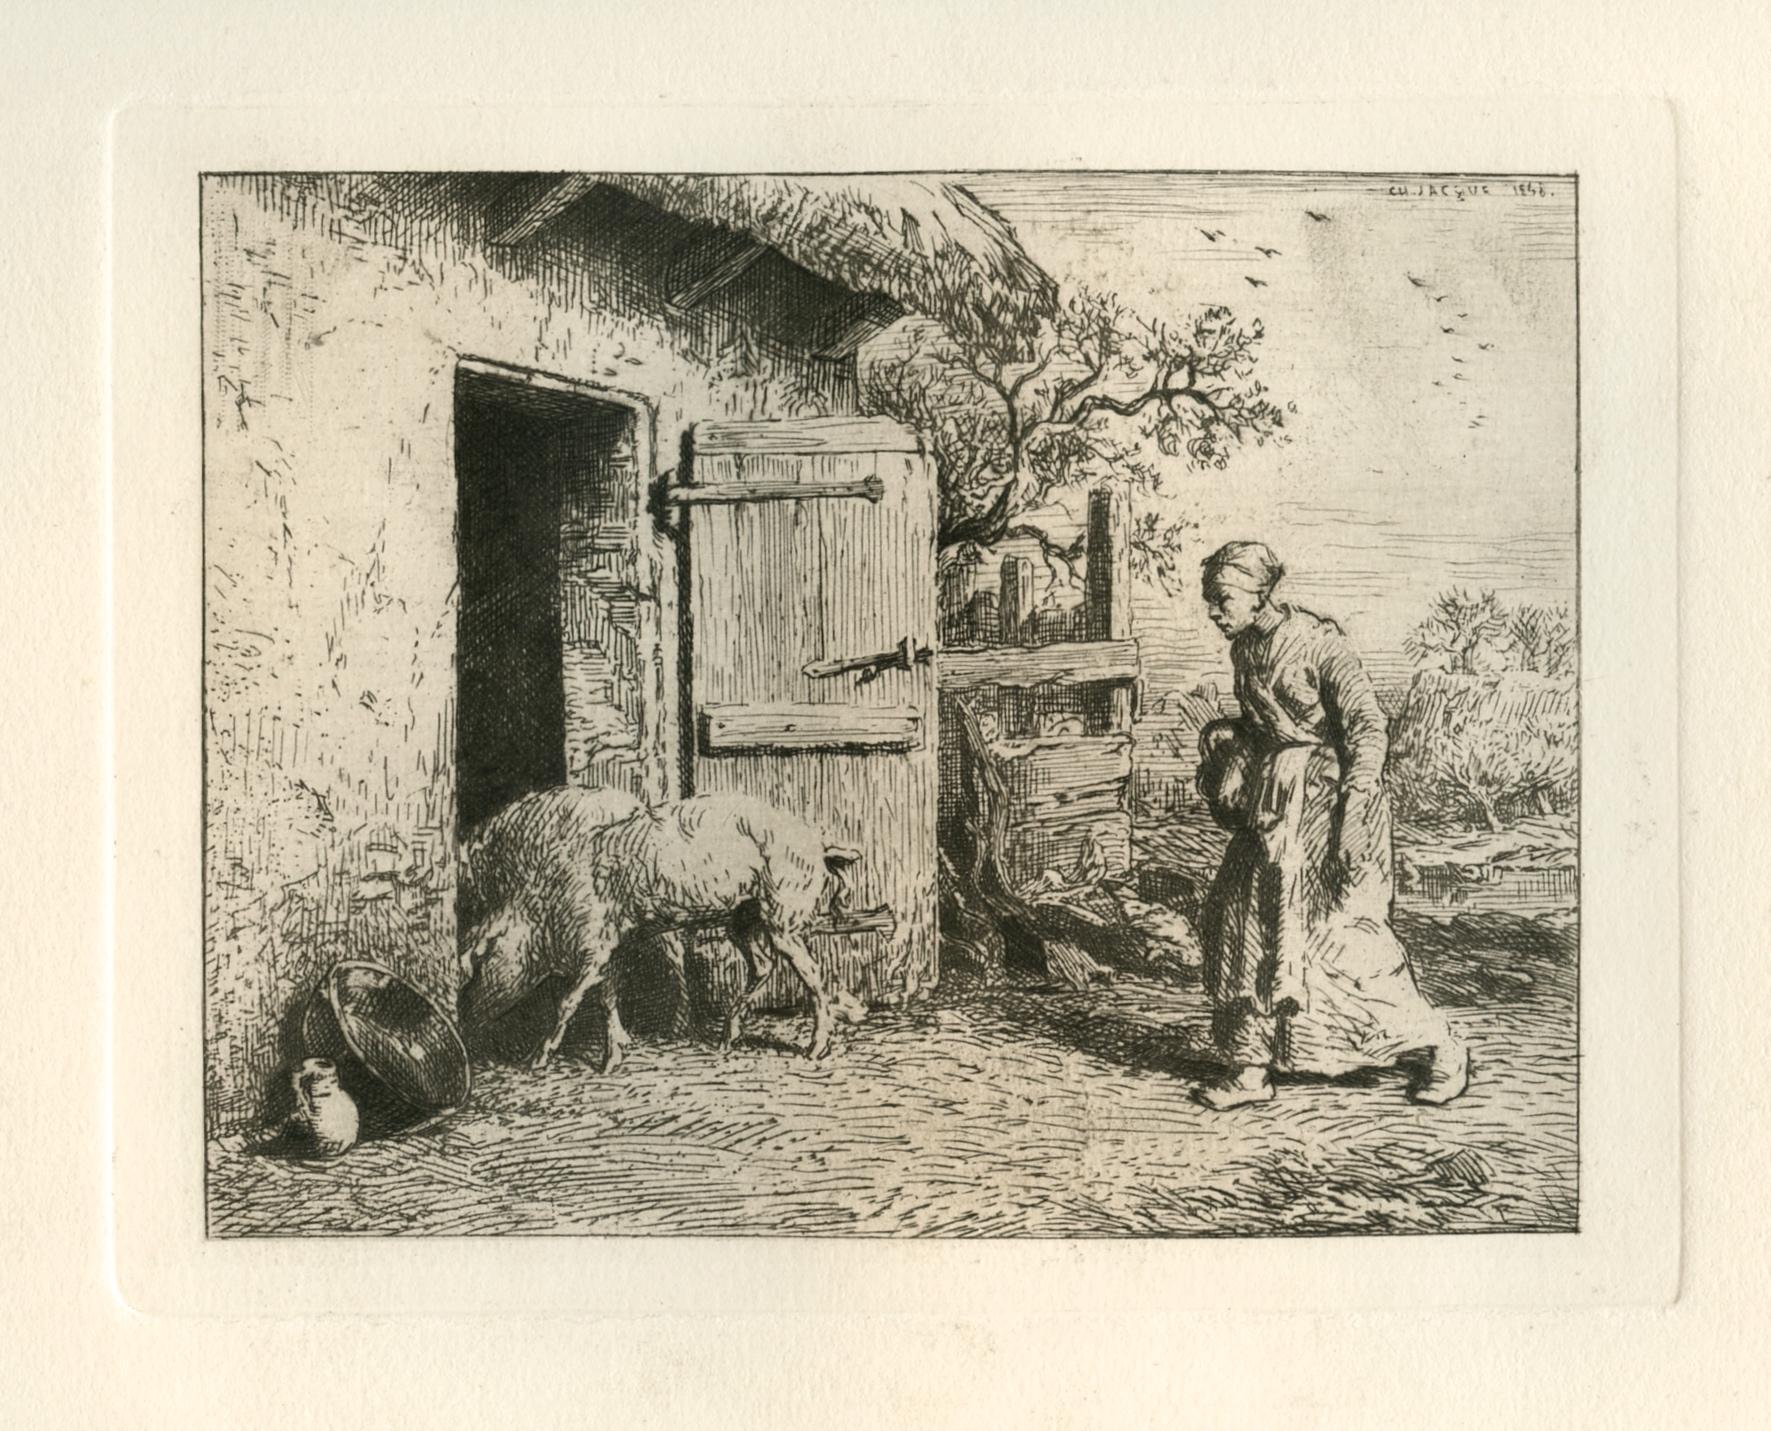 "Peasant Woman Driving Pigs into a Stable" original etching - Print by Charles-Emile Jacque